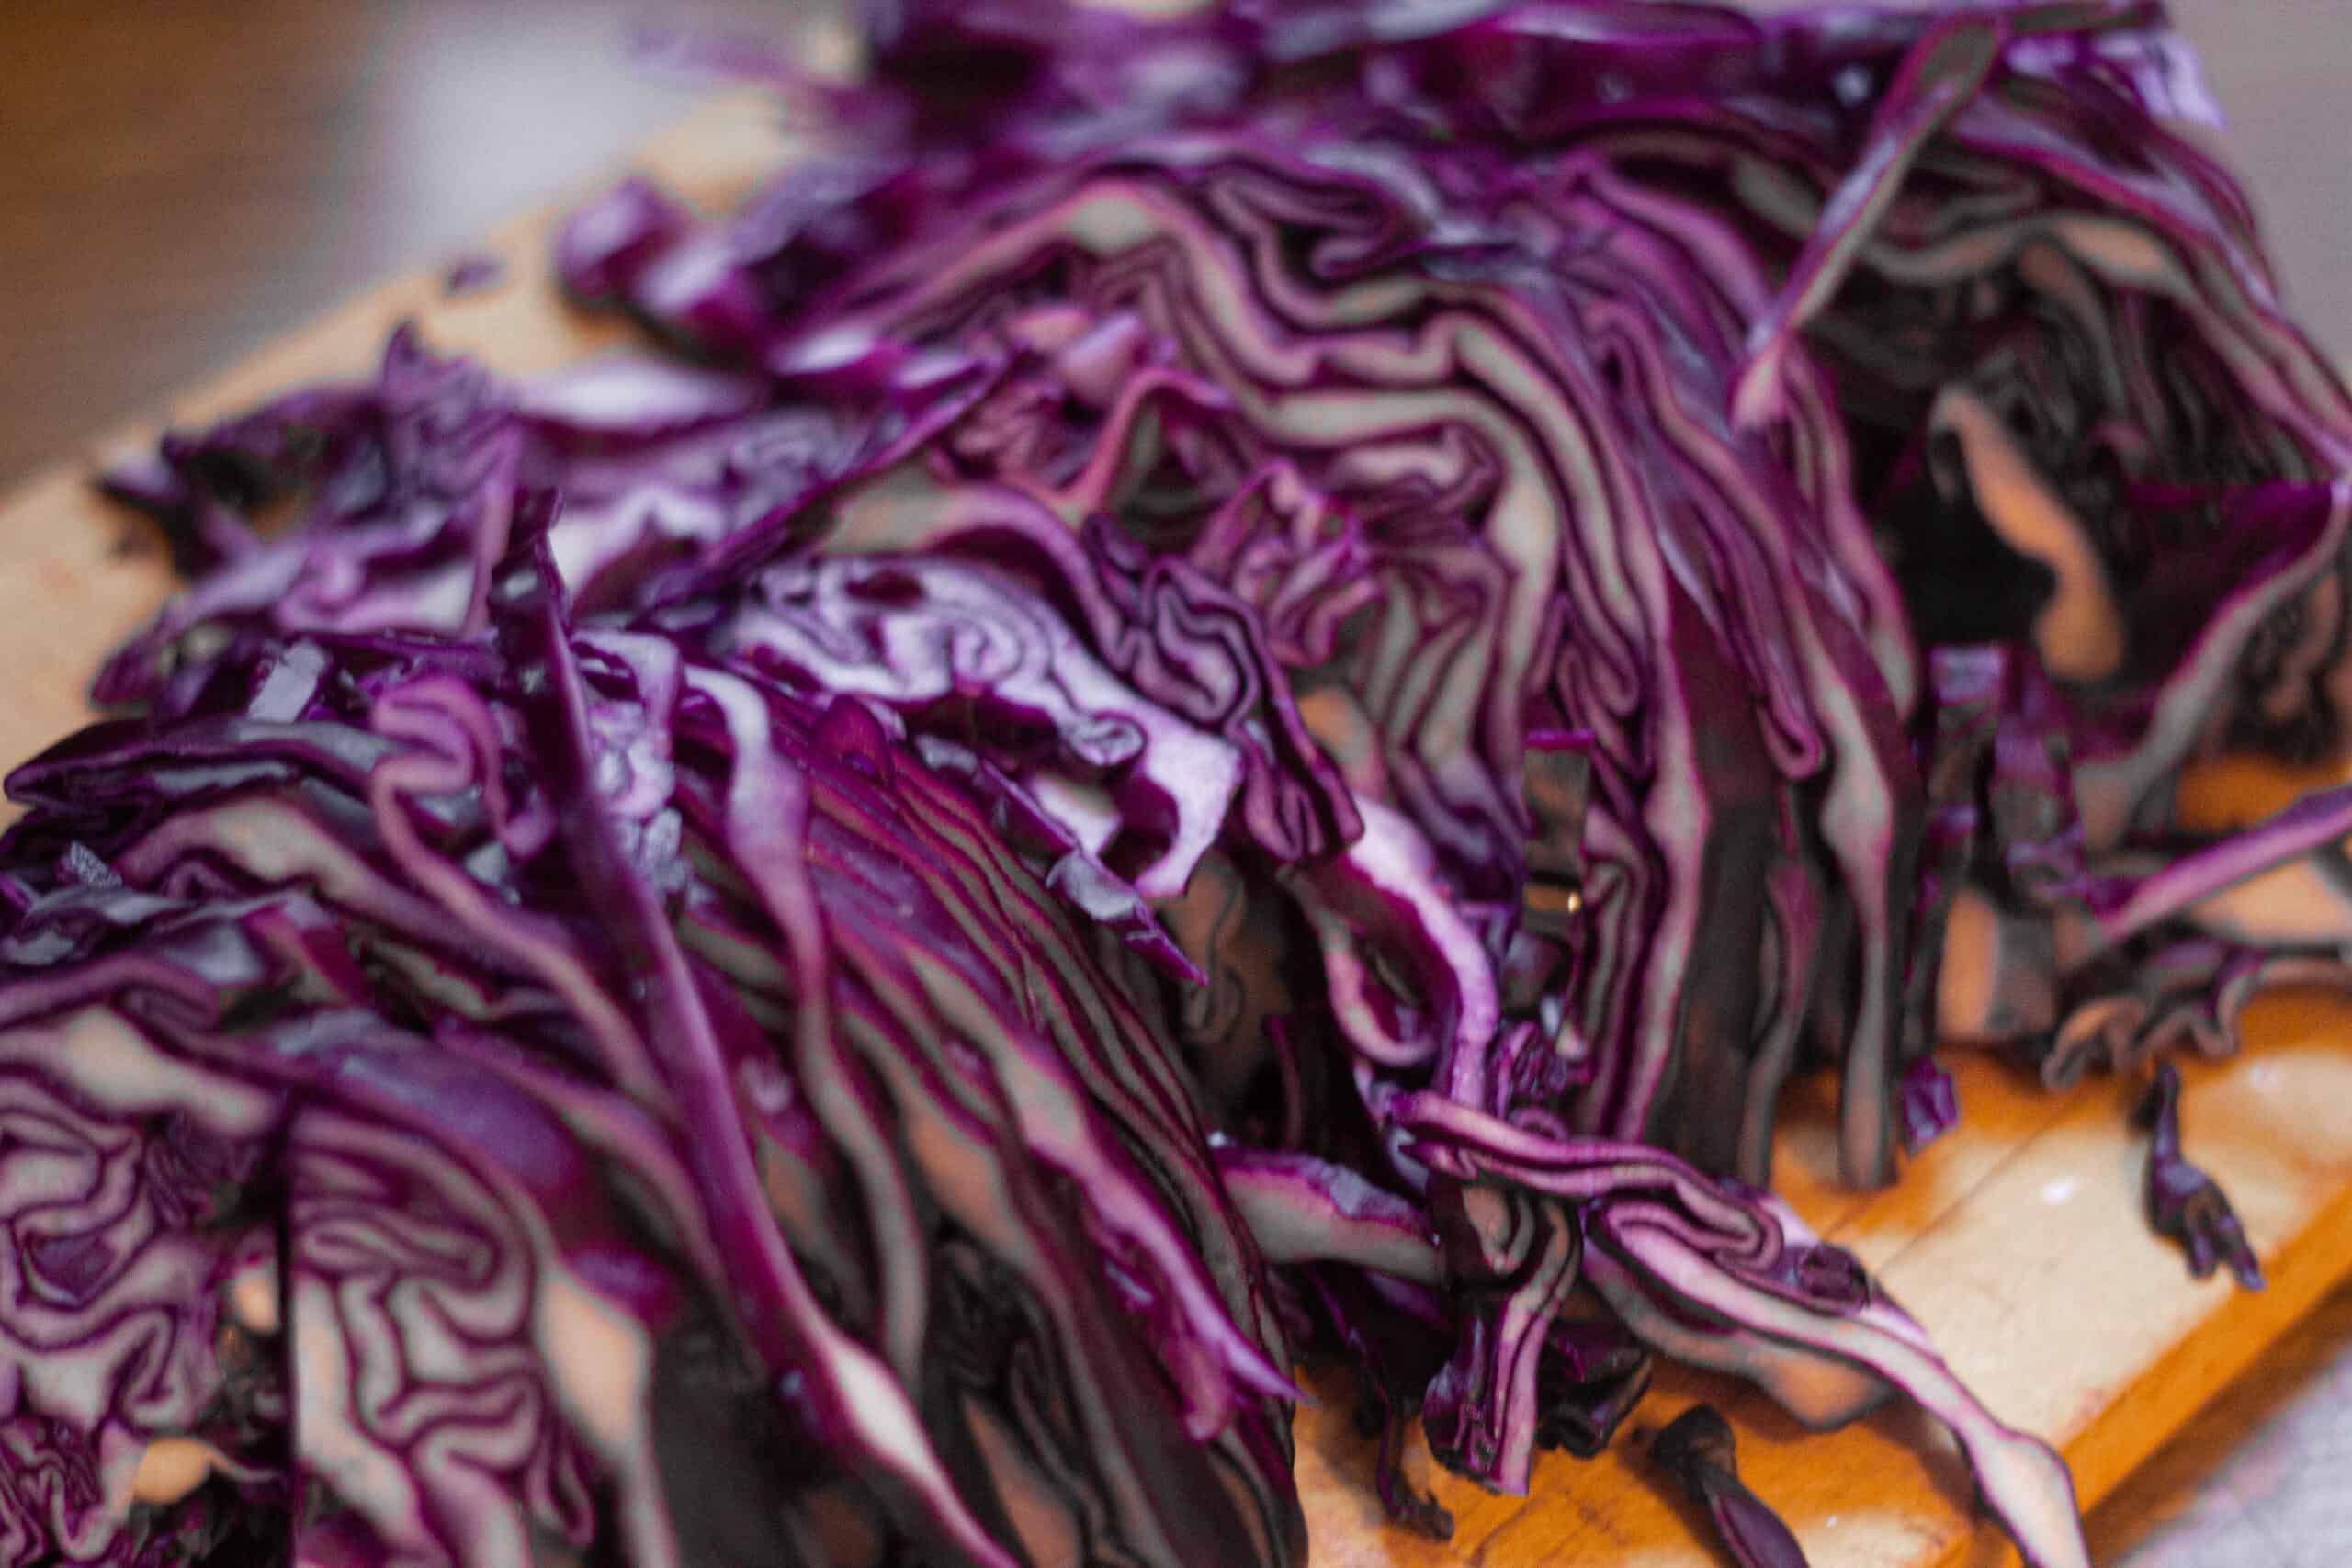 Red cabbage shredded